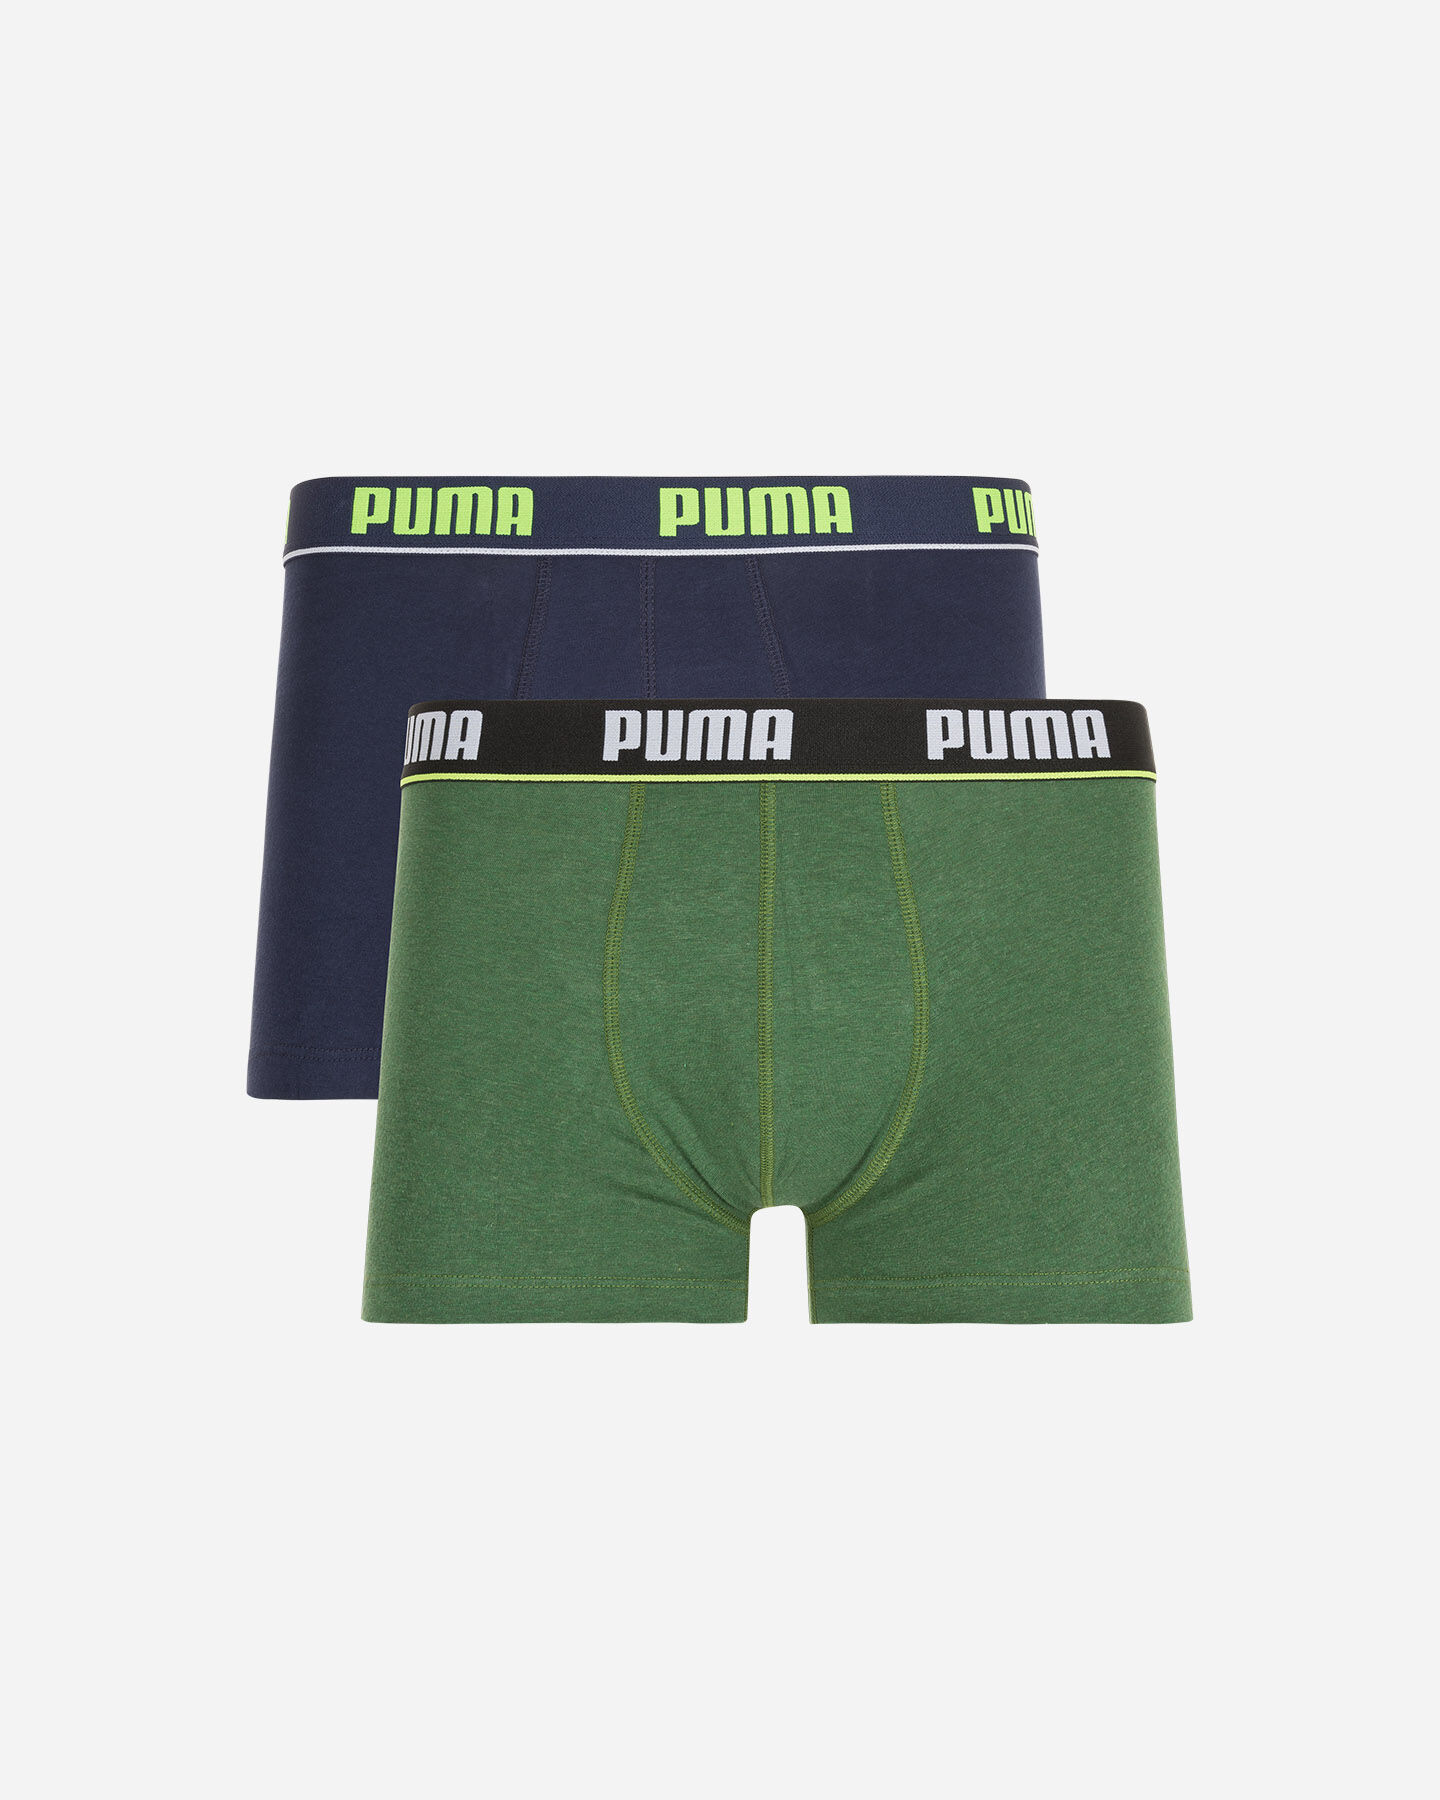  Intimo PUMA 2 PACK BOXER SHORT M S4076470|439|010 scatto 0